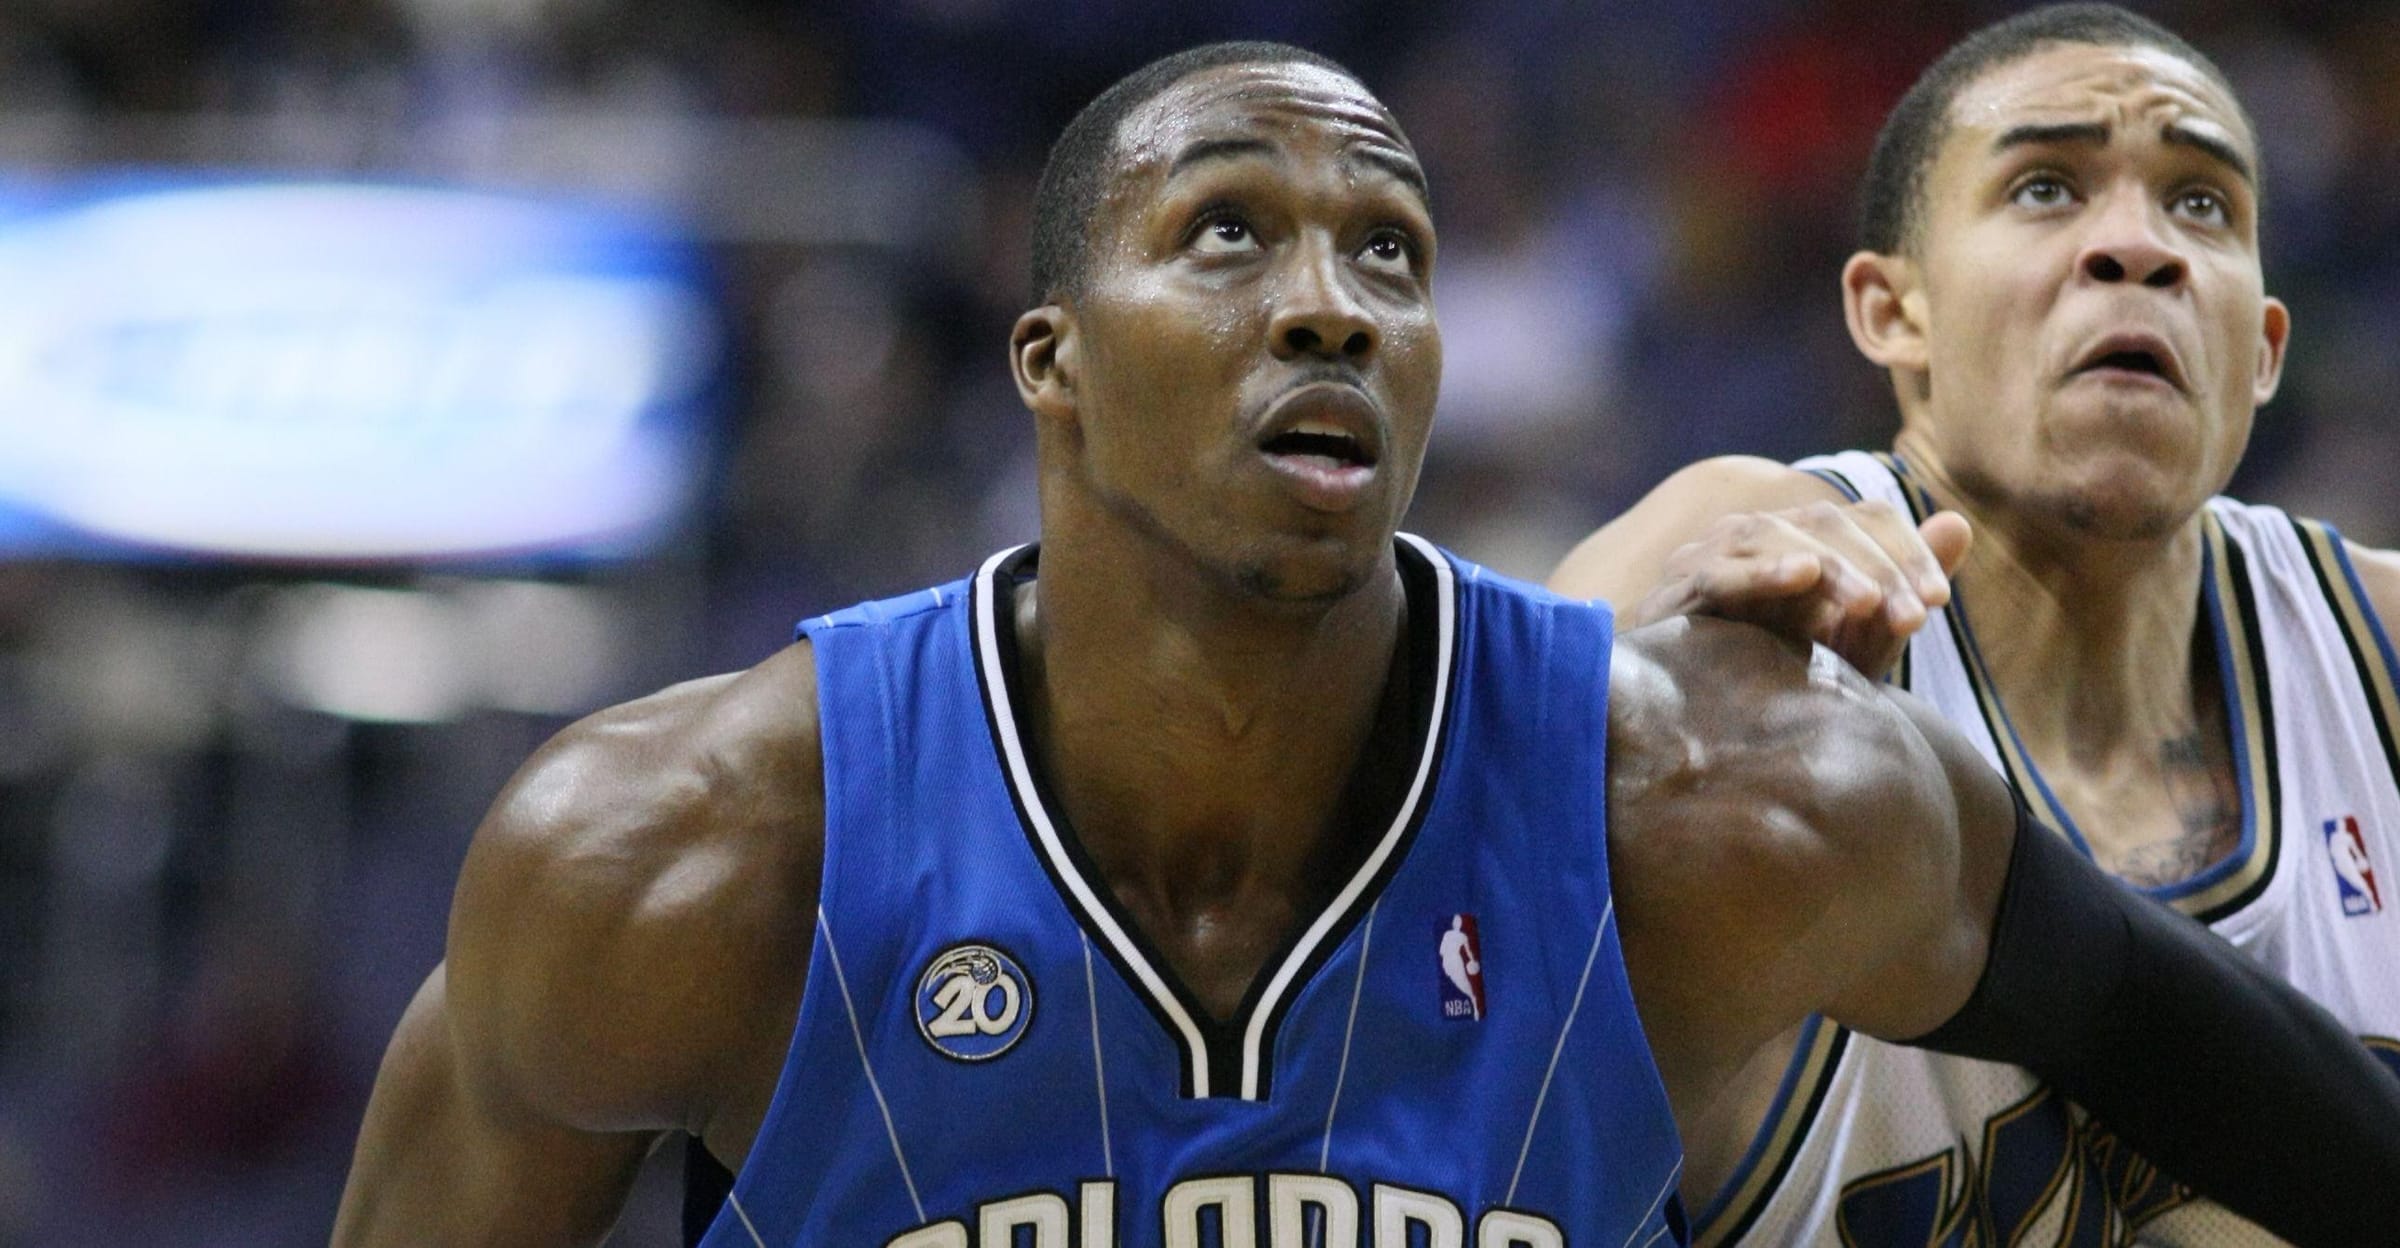 The Top 10 Orlando Magic Players of All Time, Ranked By a Miami